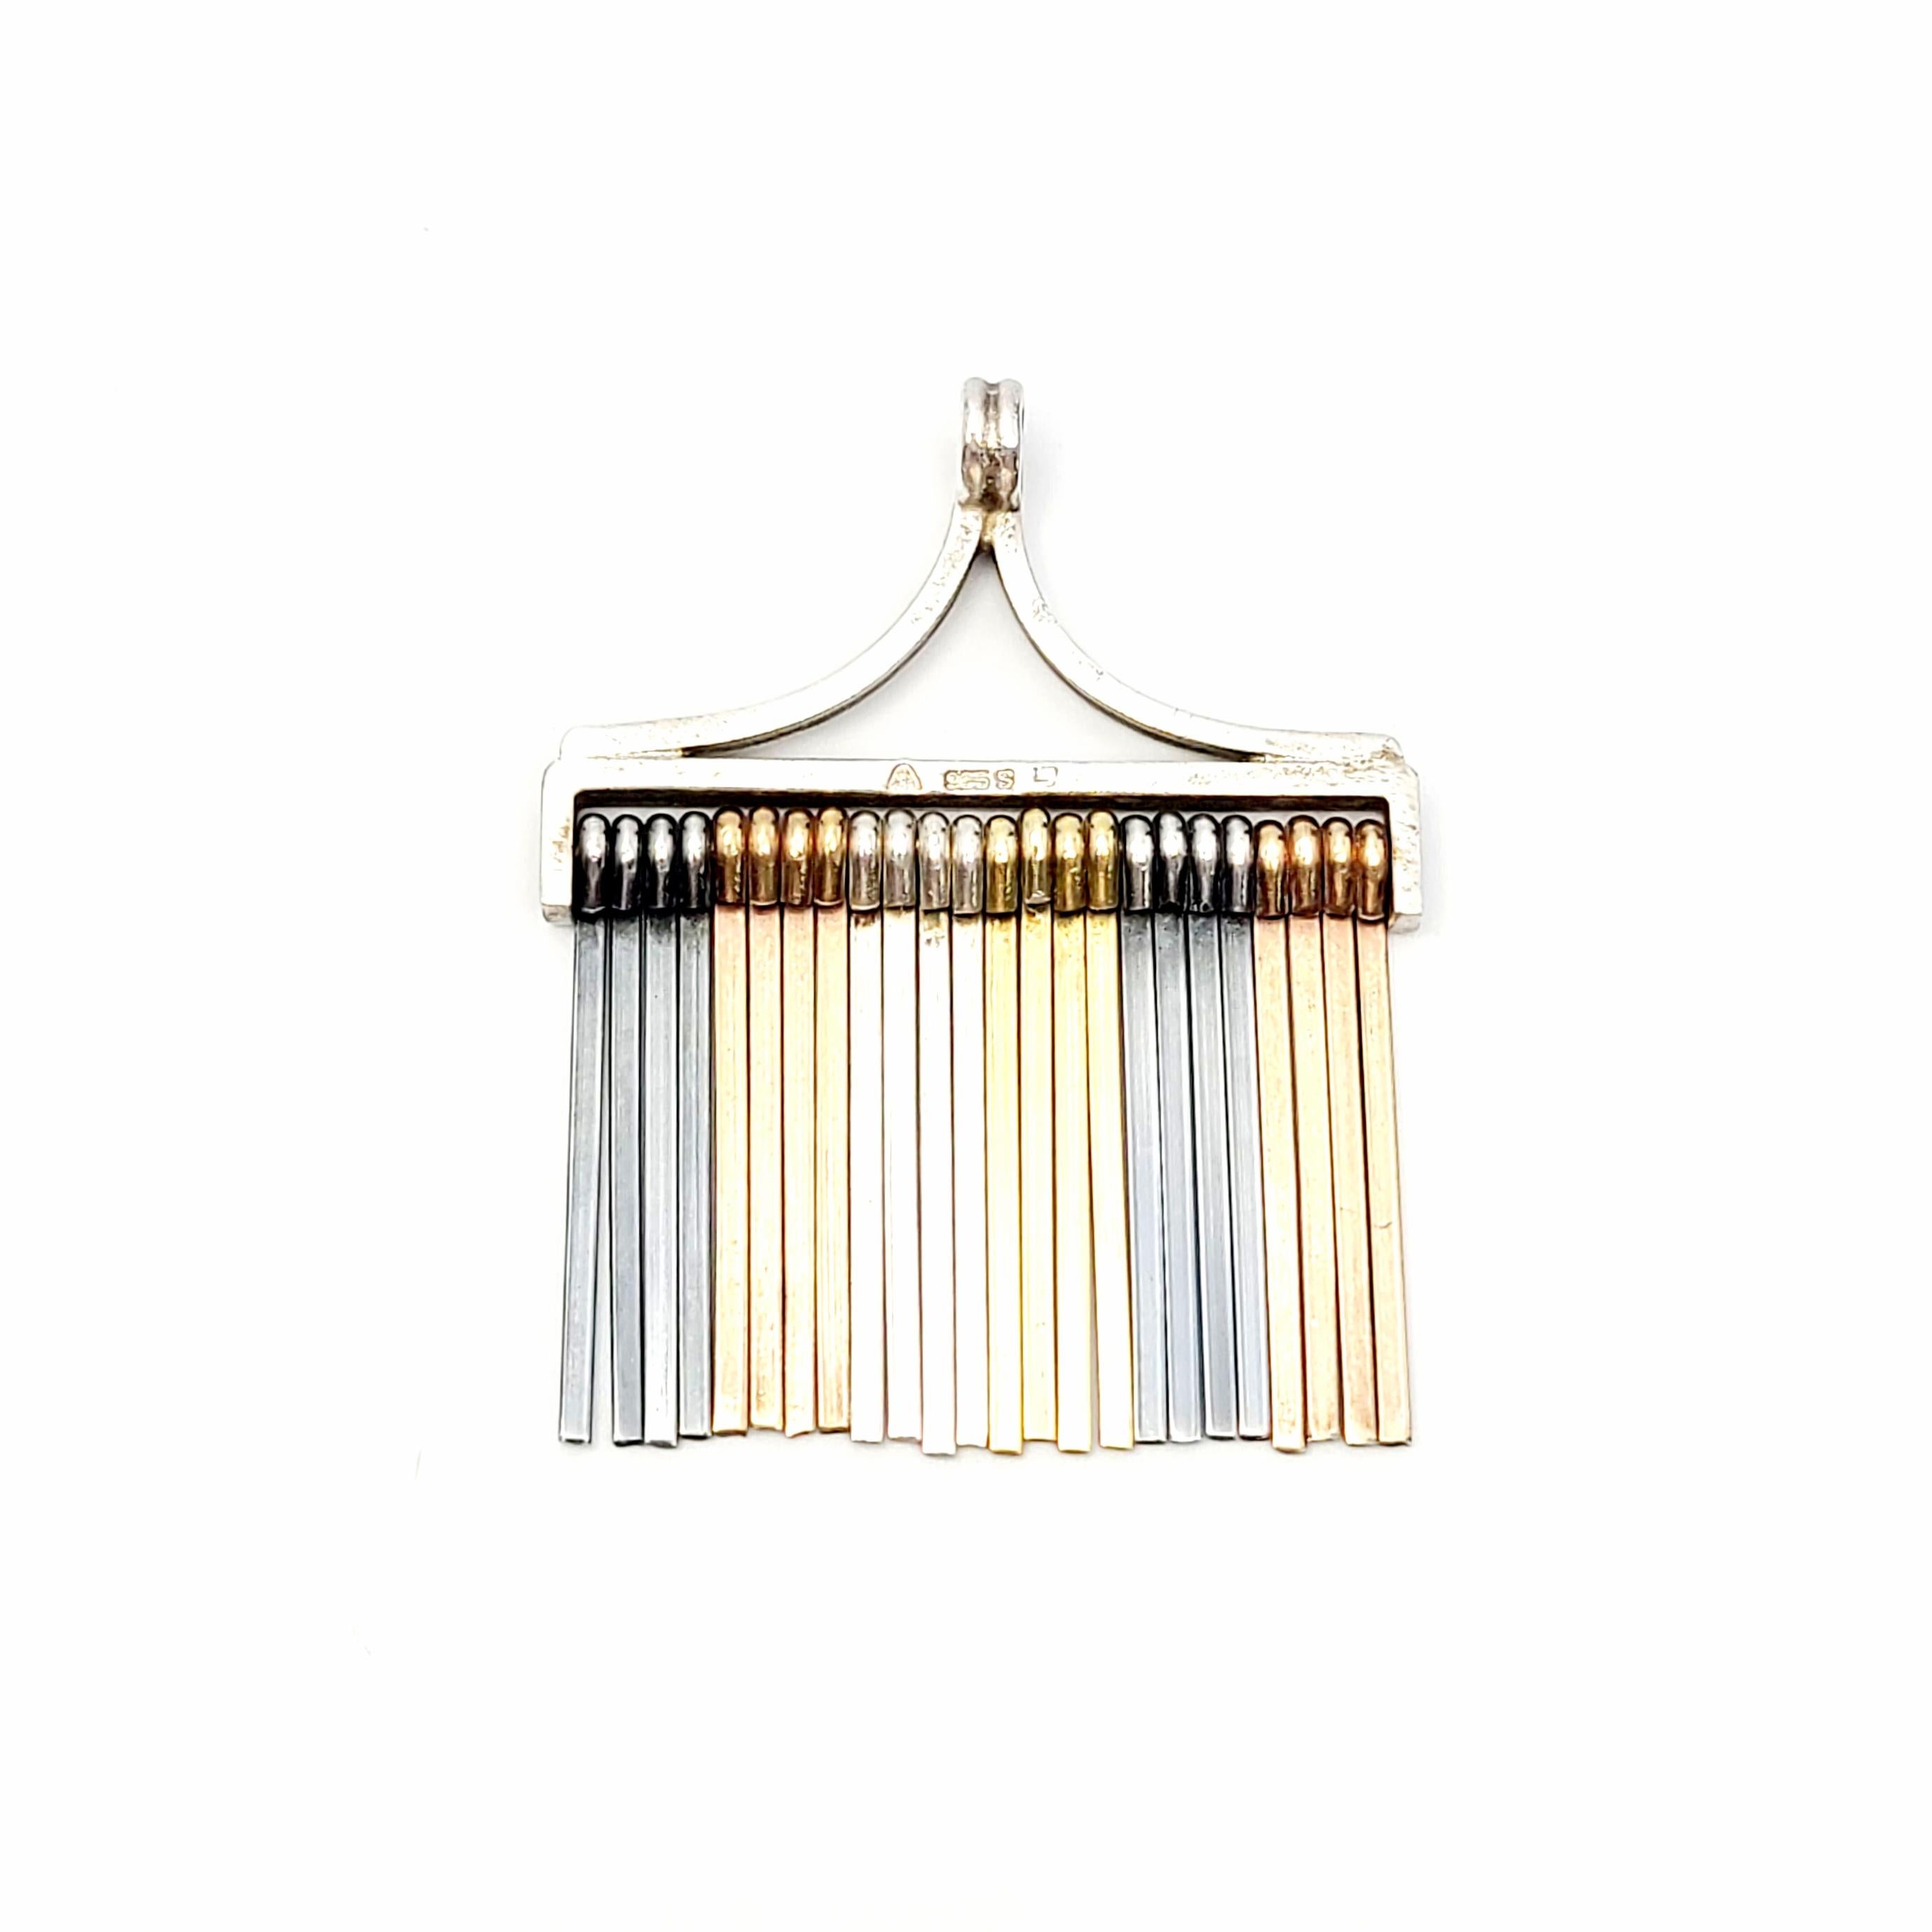 Vintage Four Color sterling silver fringe pendant designed by Eigil Jensen for Anton Michelsen of Denmark.

Sterling silver tines hang in four color groups: silver, oxidized silver, plated in gold and plated in rose gold. Circa mid-late 20th